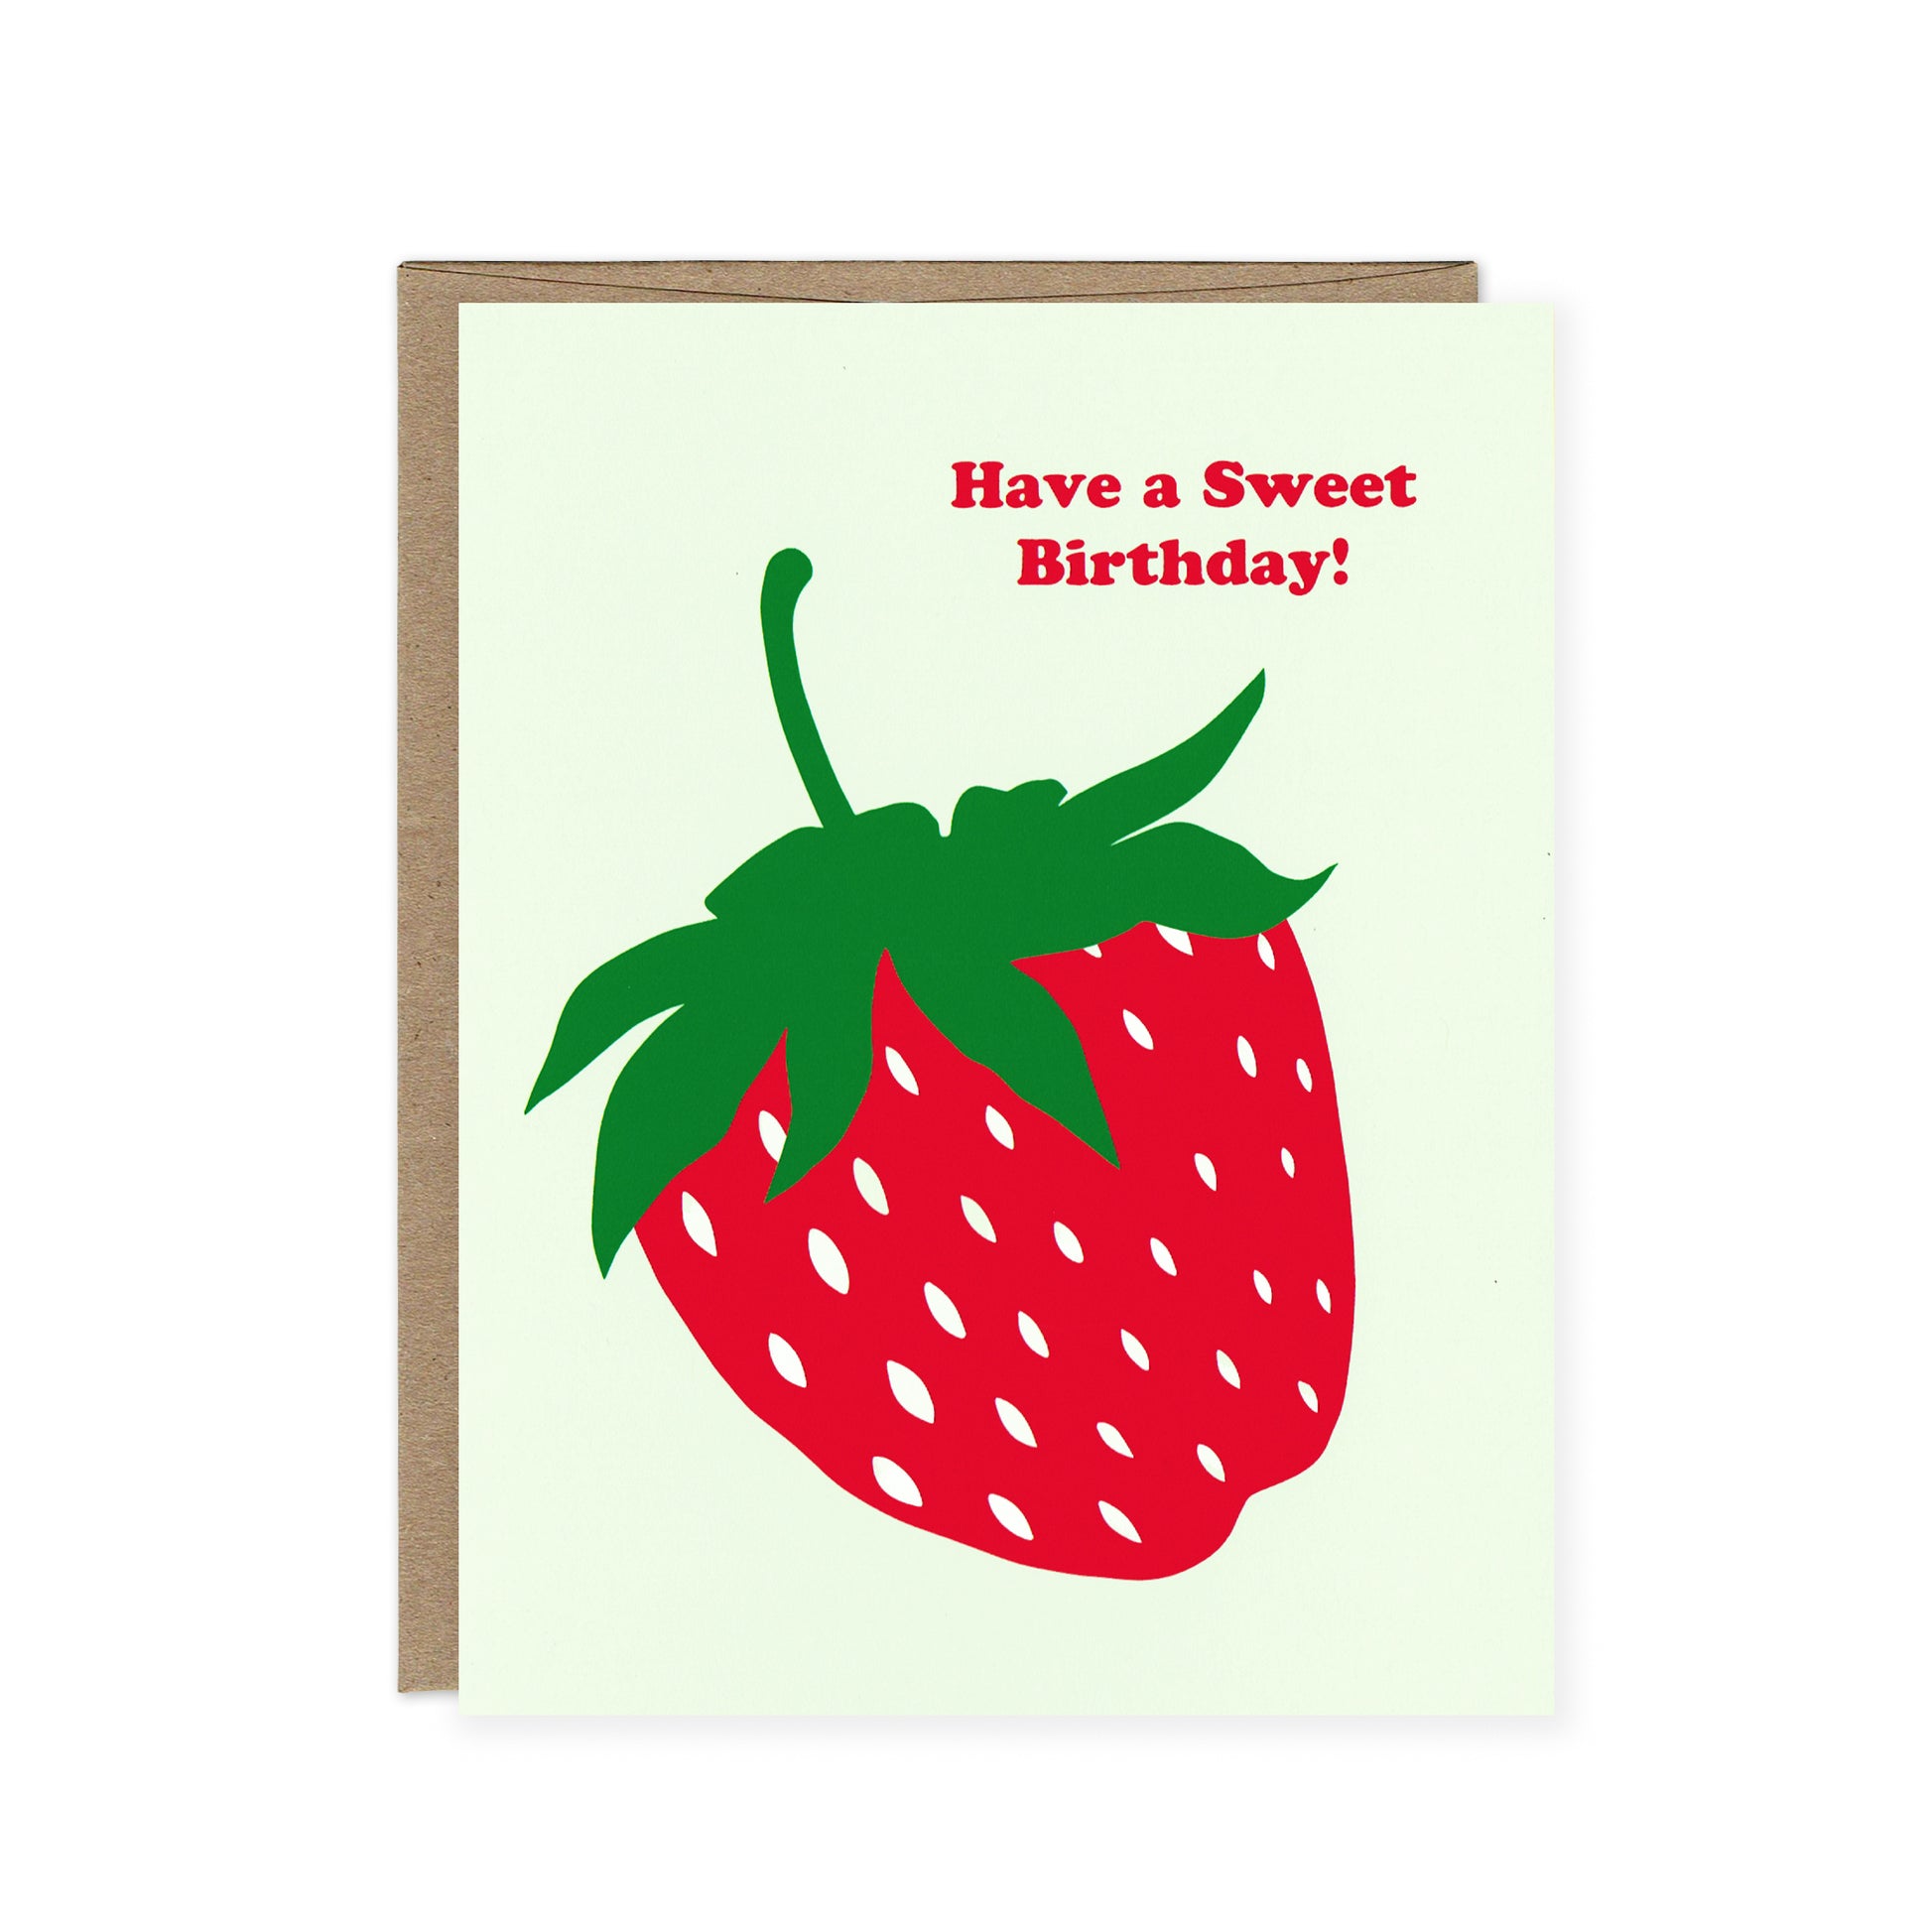 A luscious, red strawberry and the words "Have a Sweet Birthday" sit on a light green background. 